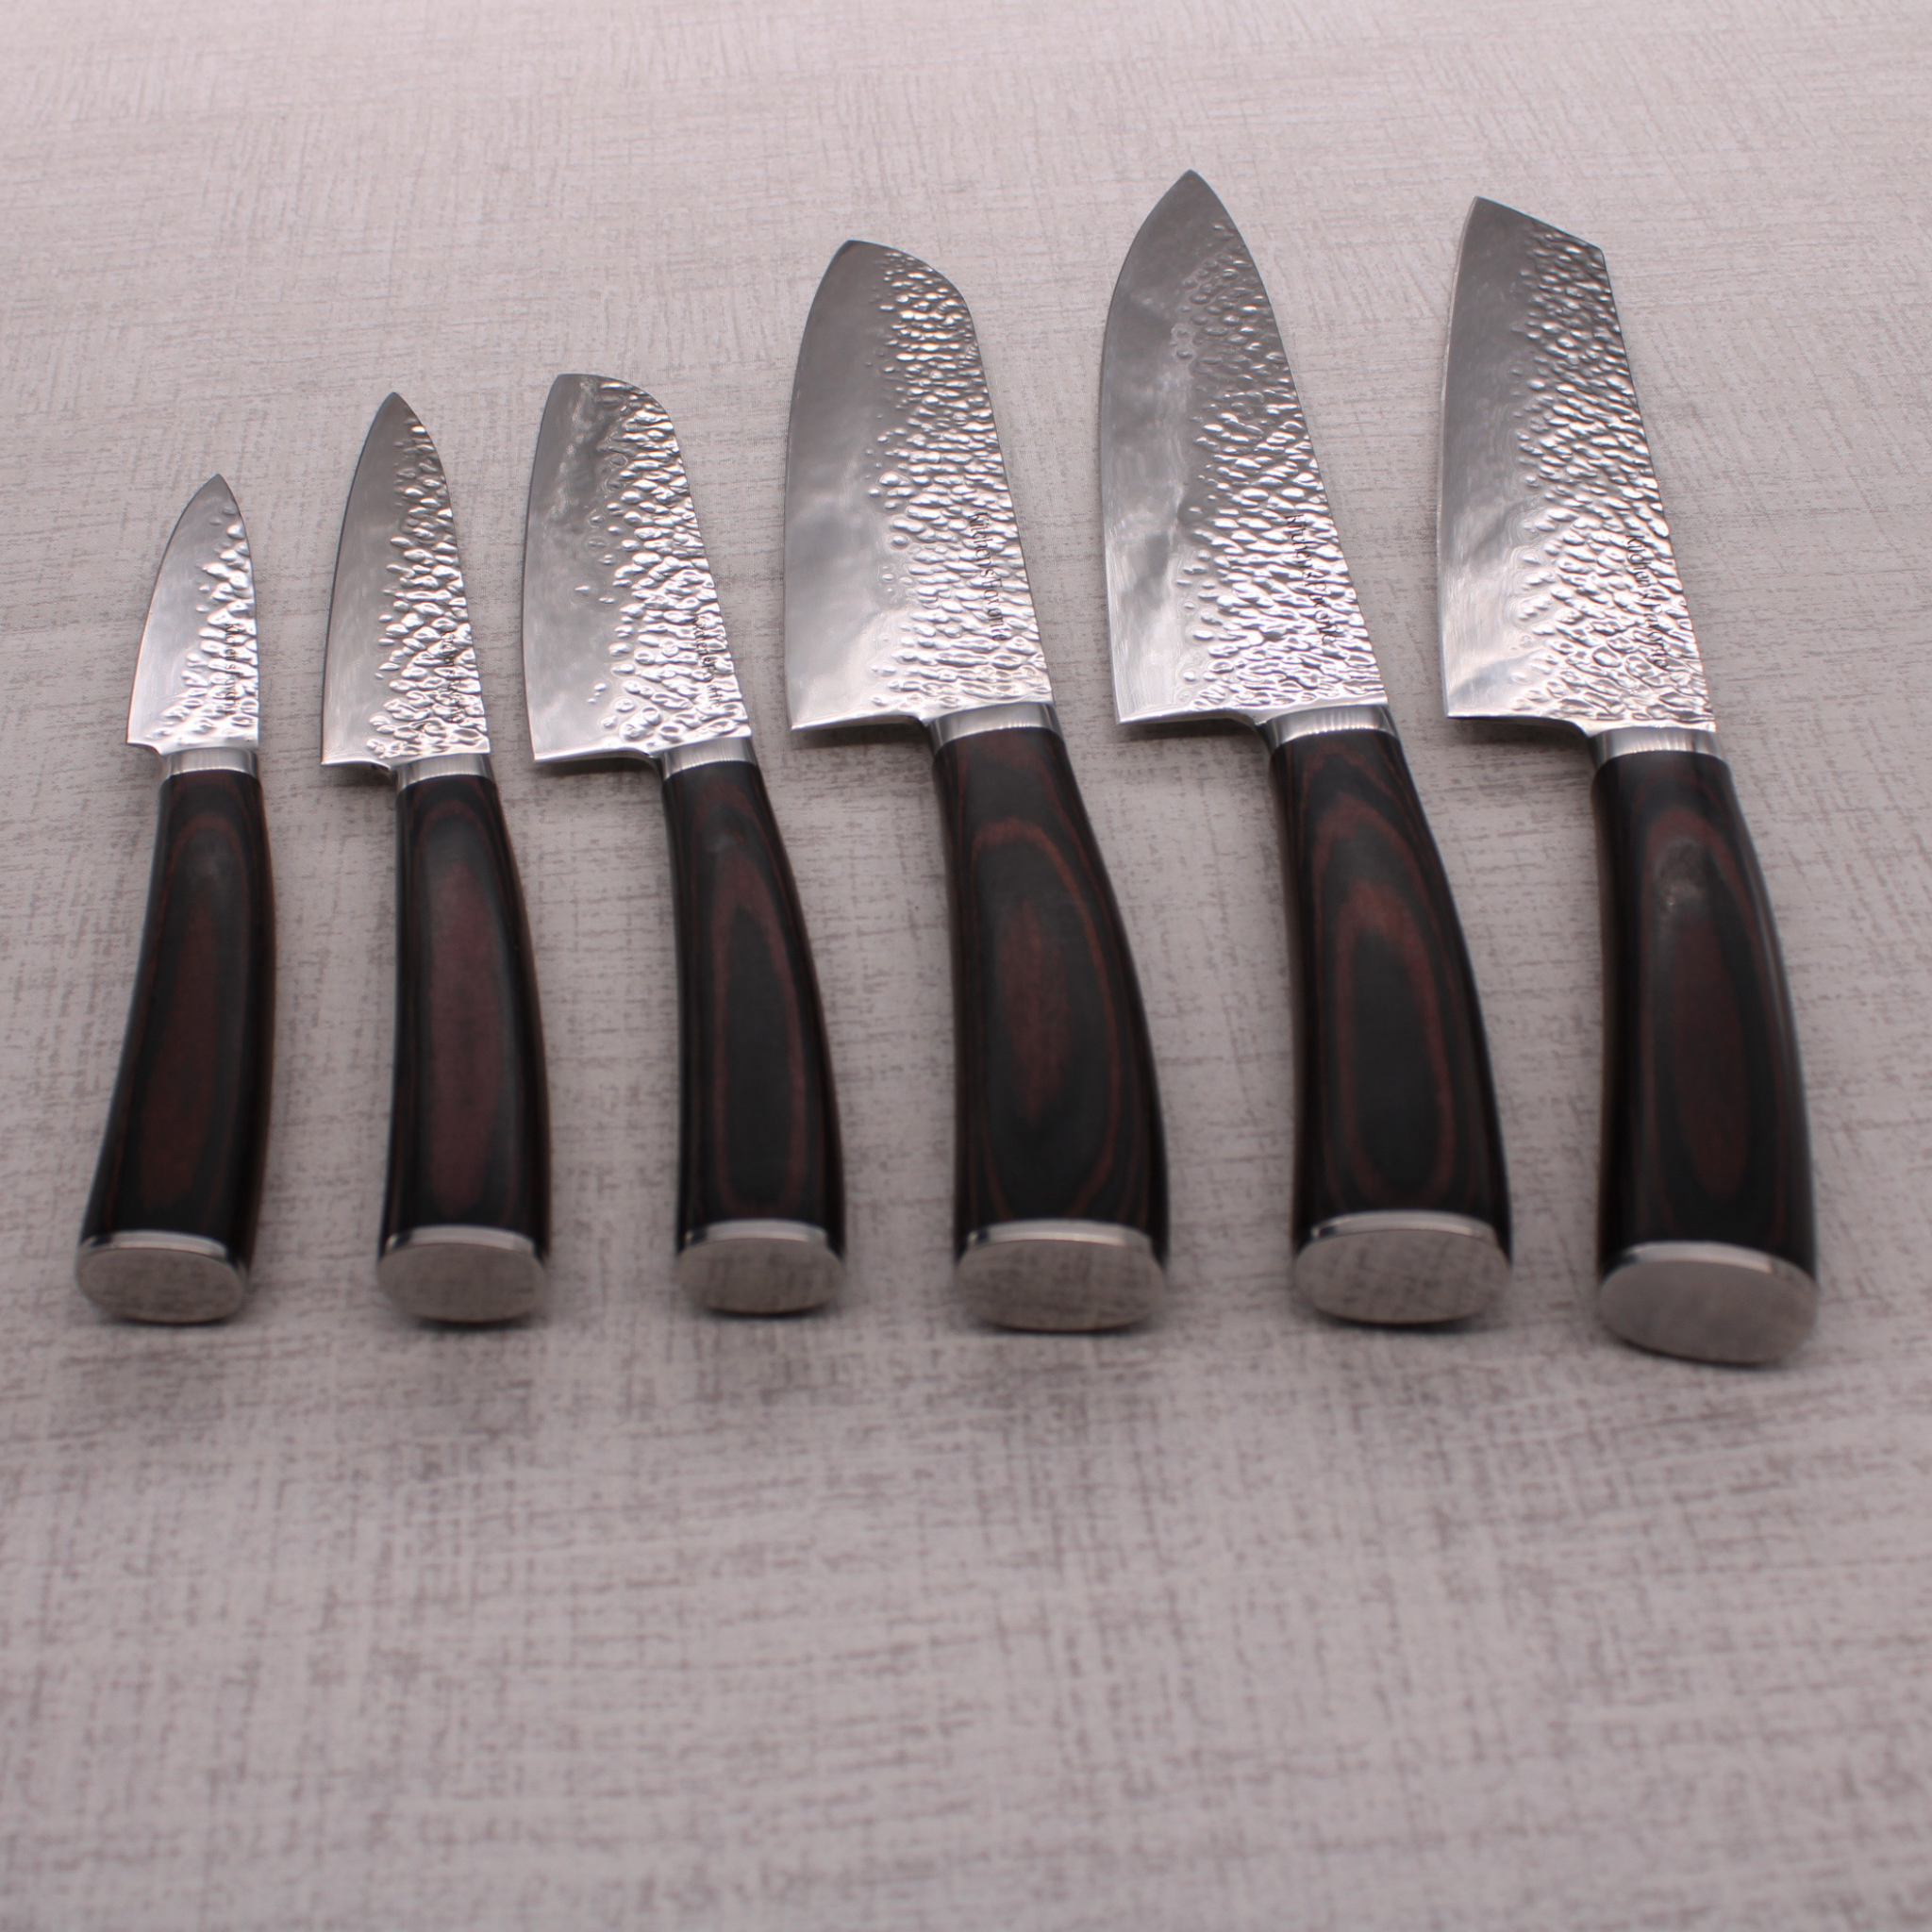 Kitchen's Favorite 6-Piece Forged Stainless Steel Knife Set